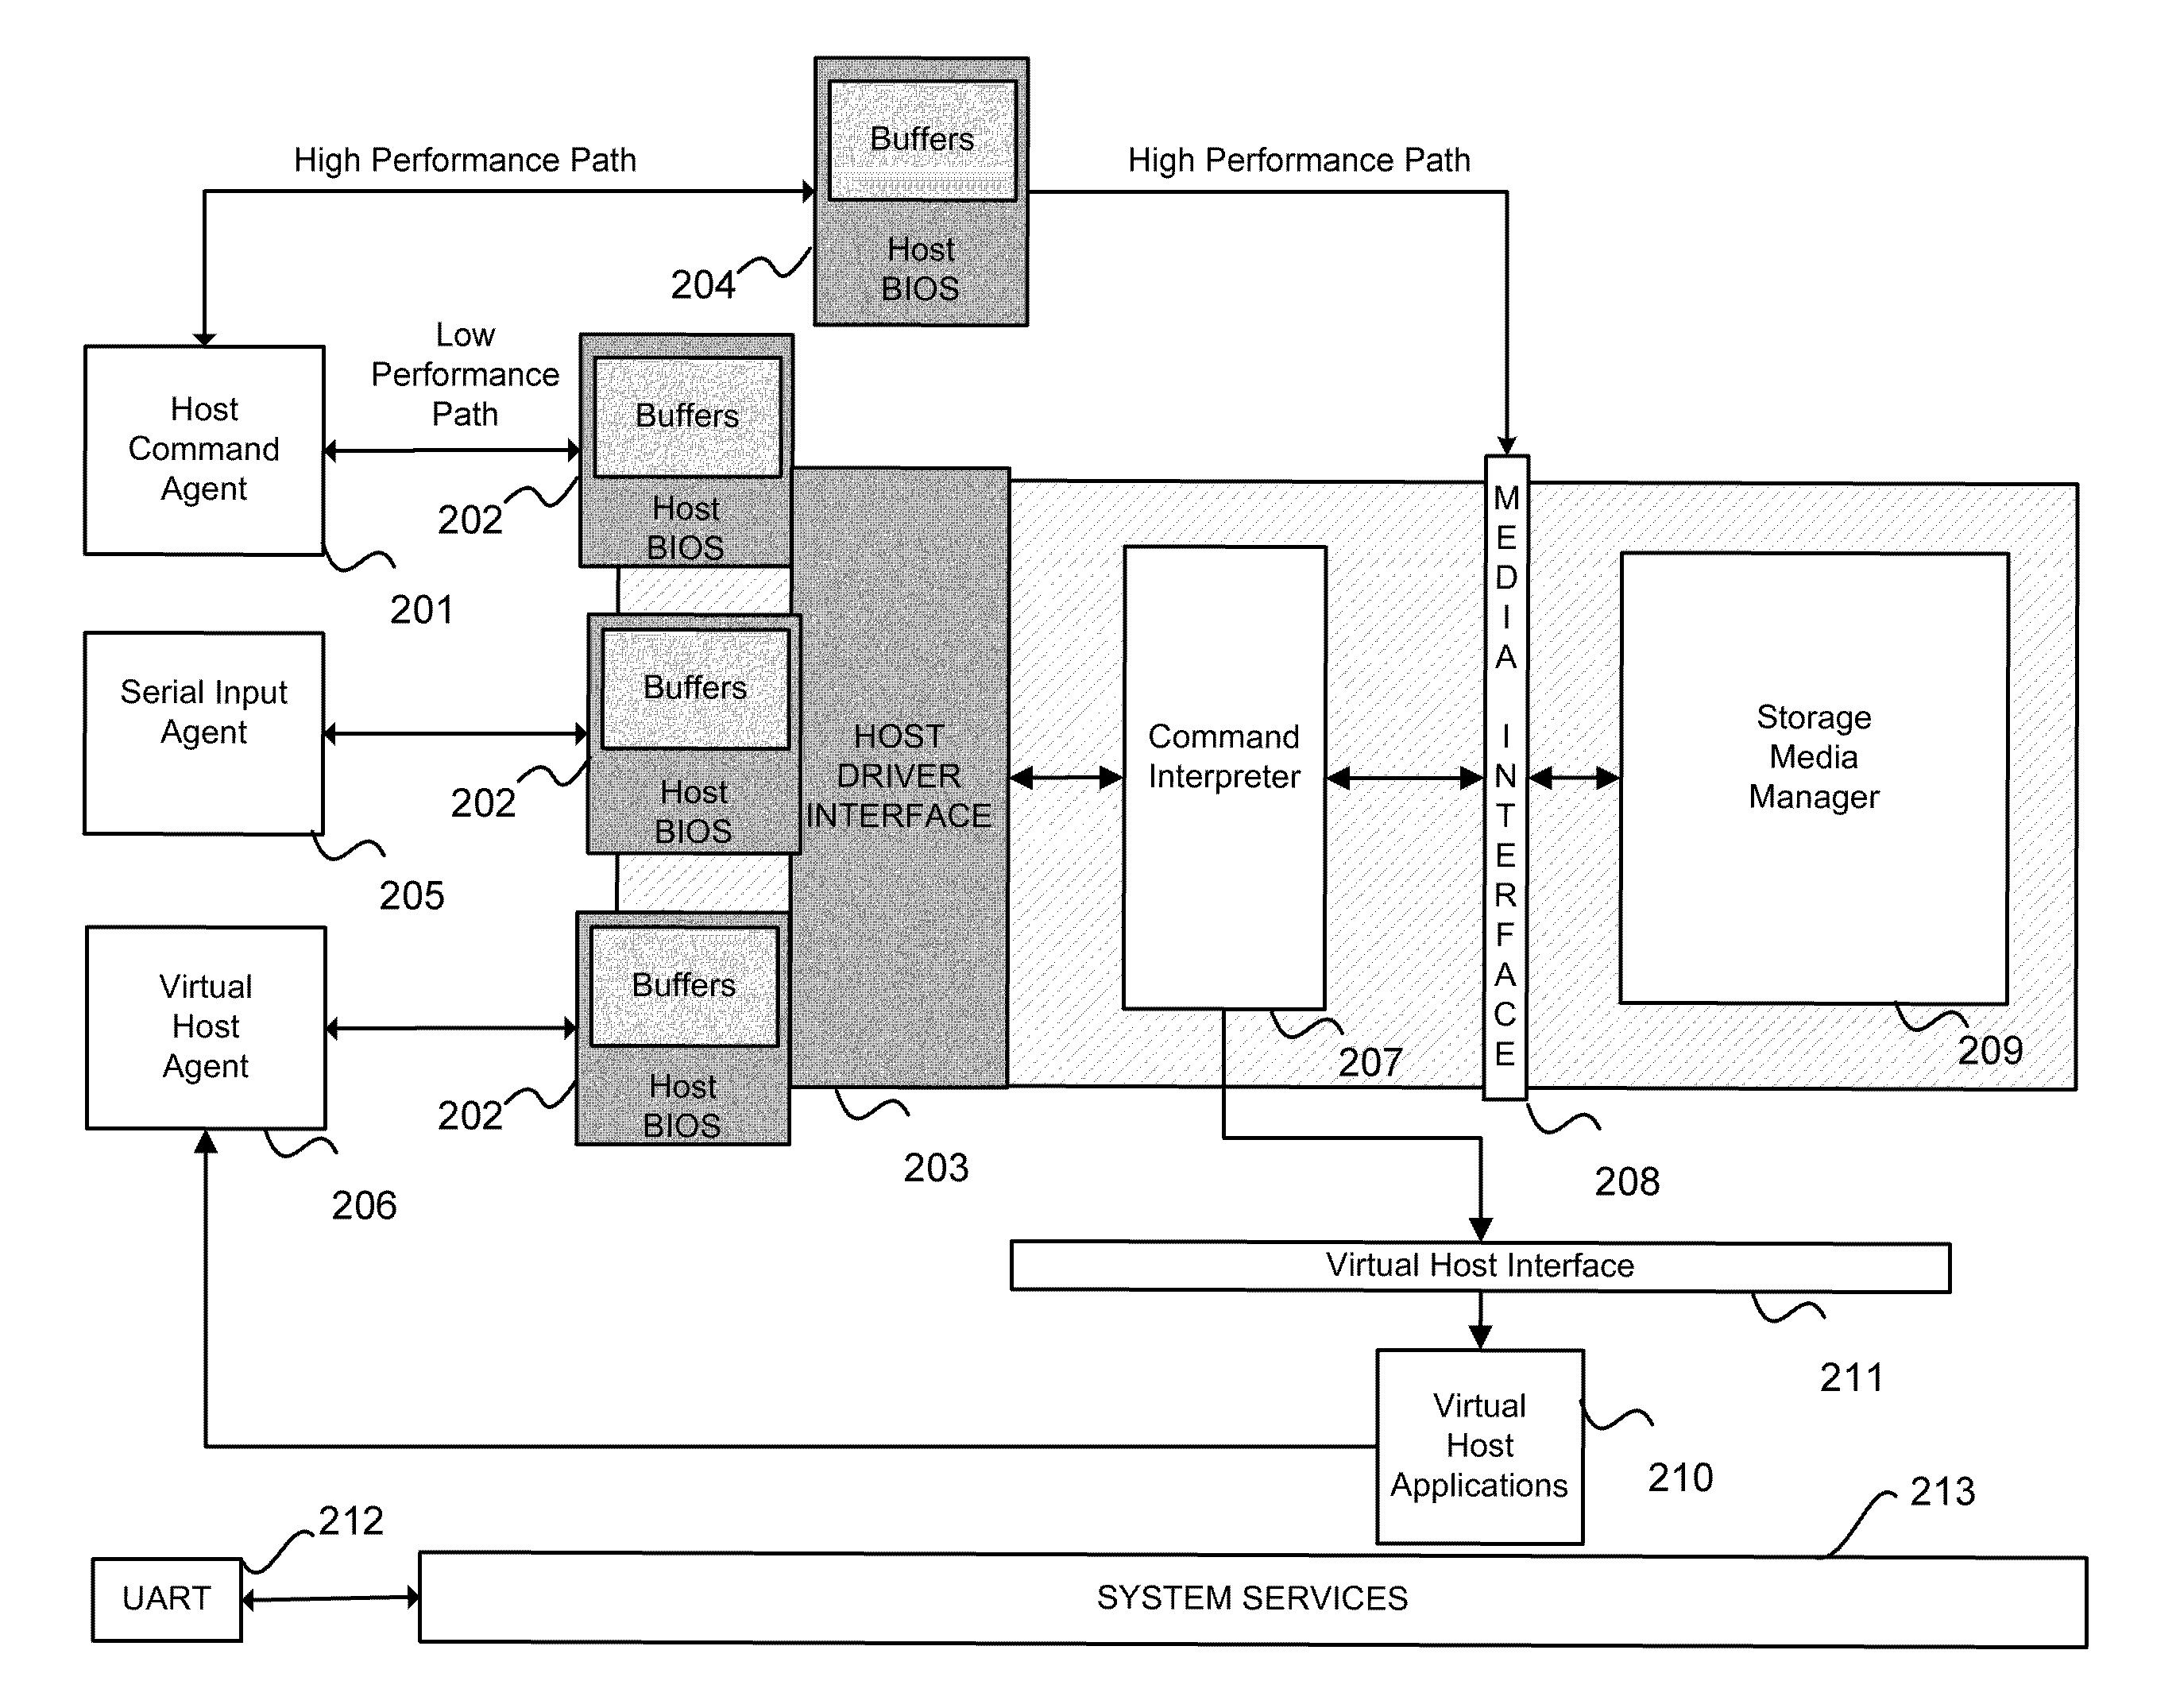 High performance path for command processing